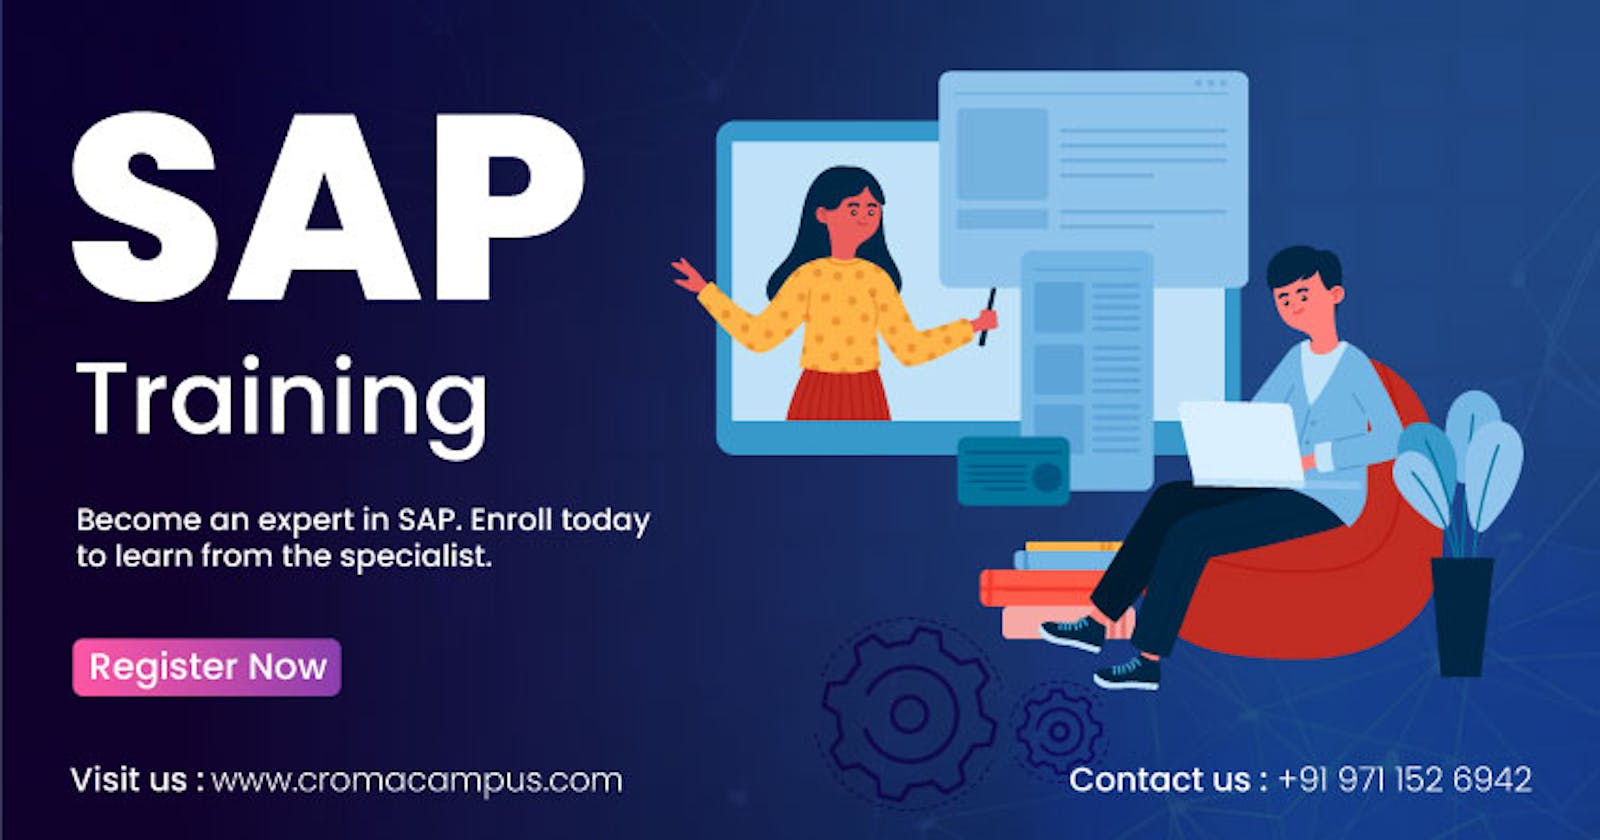 How To Get Started With SAP Training?